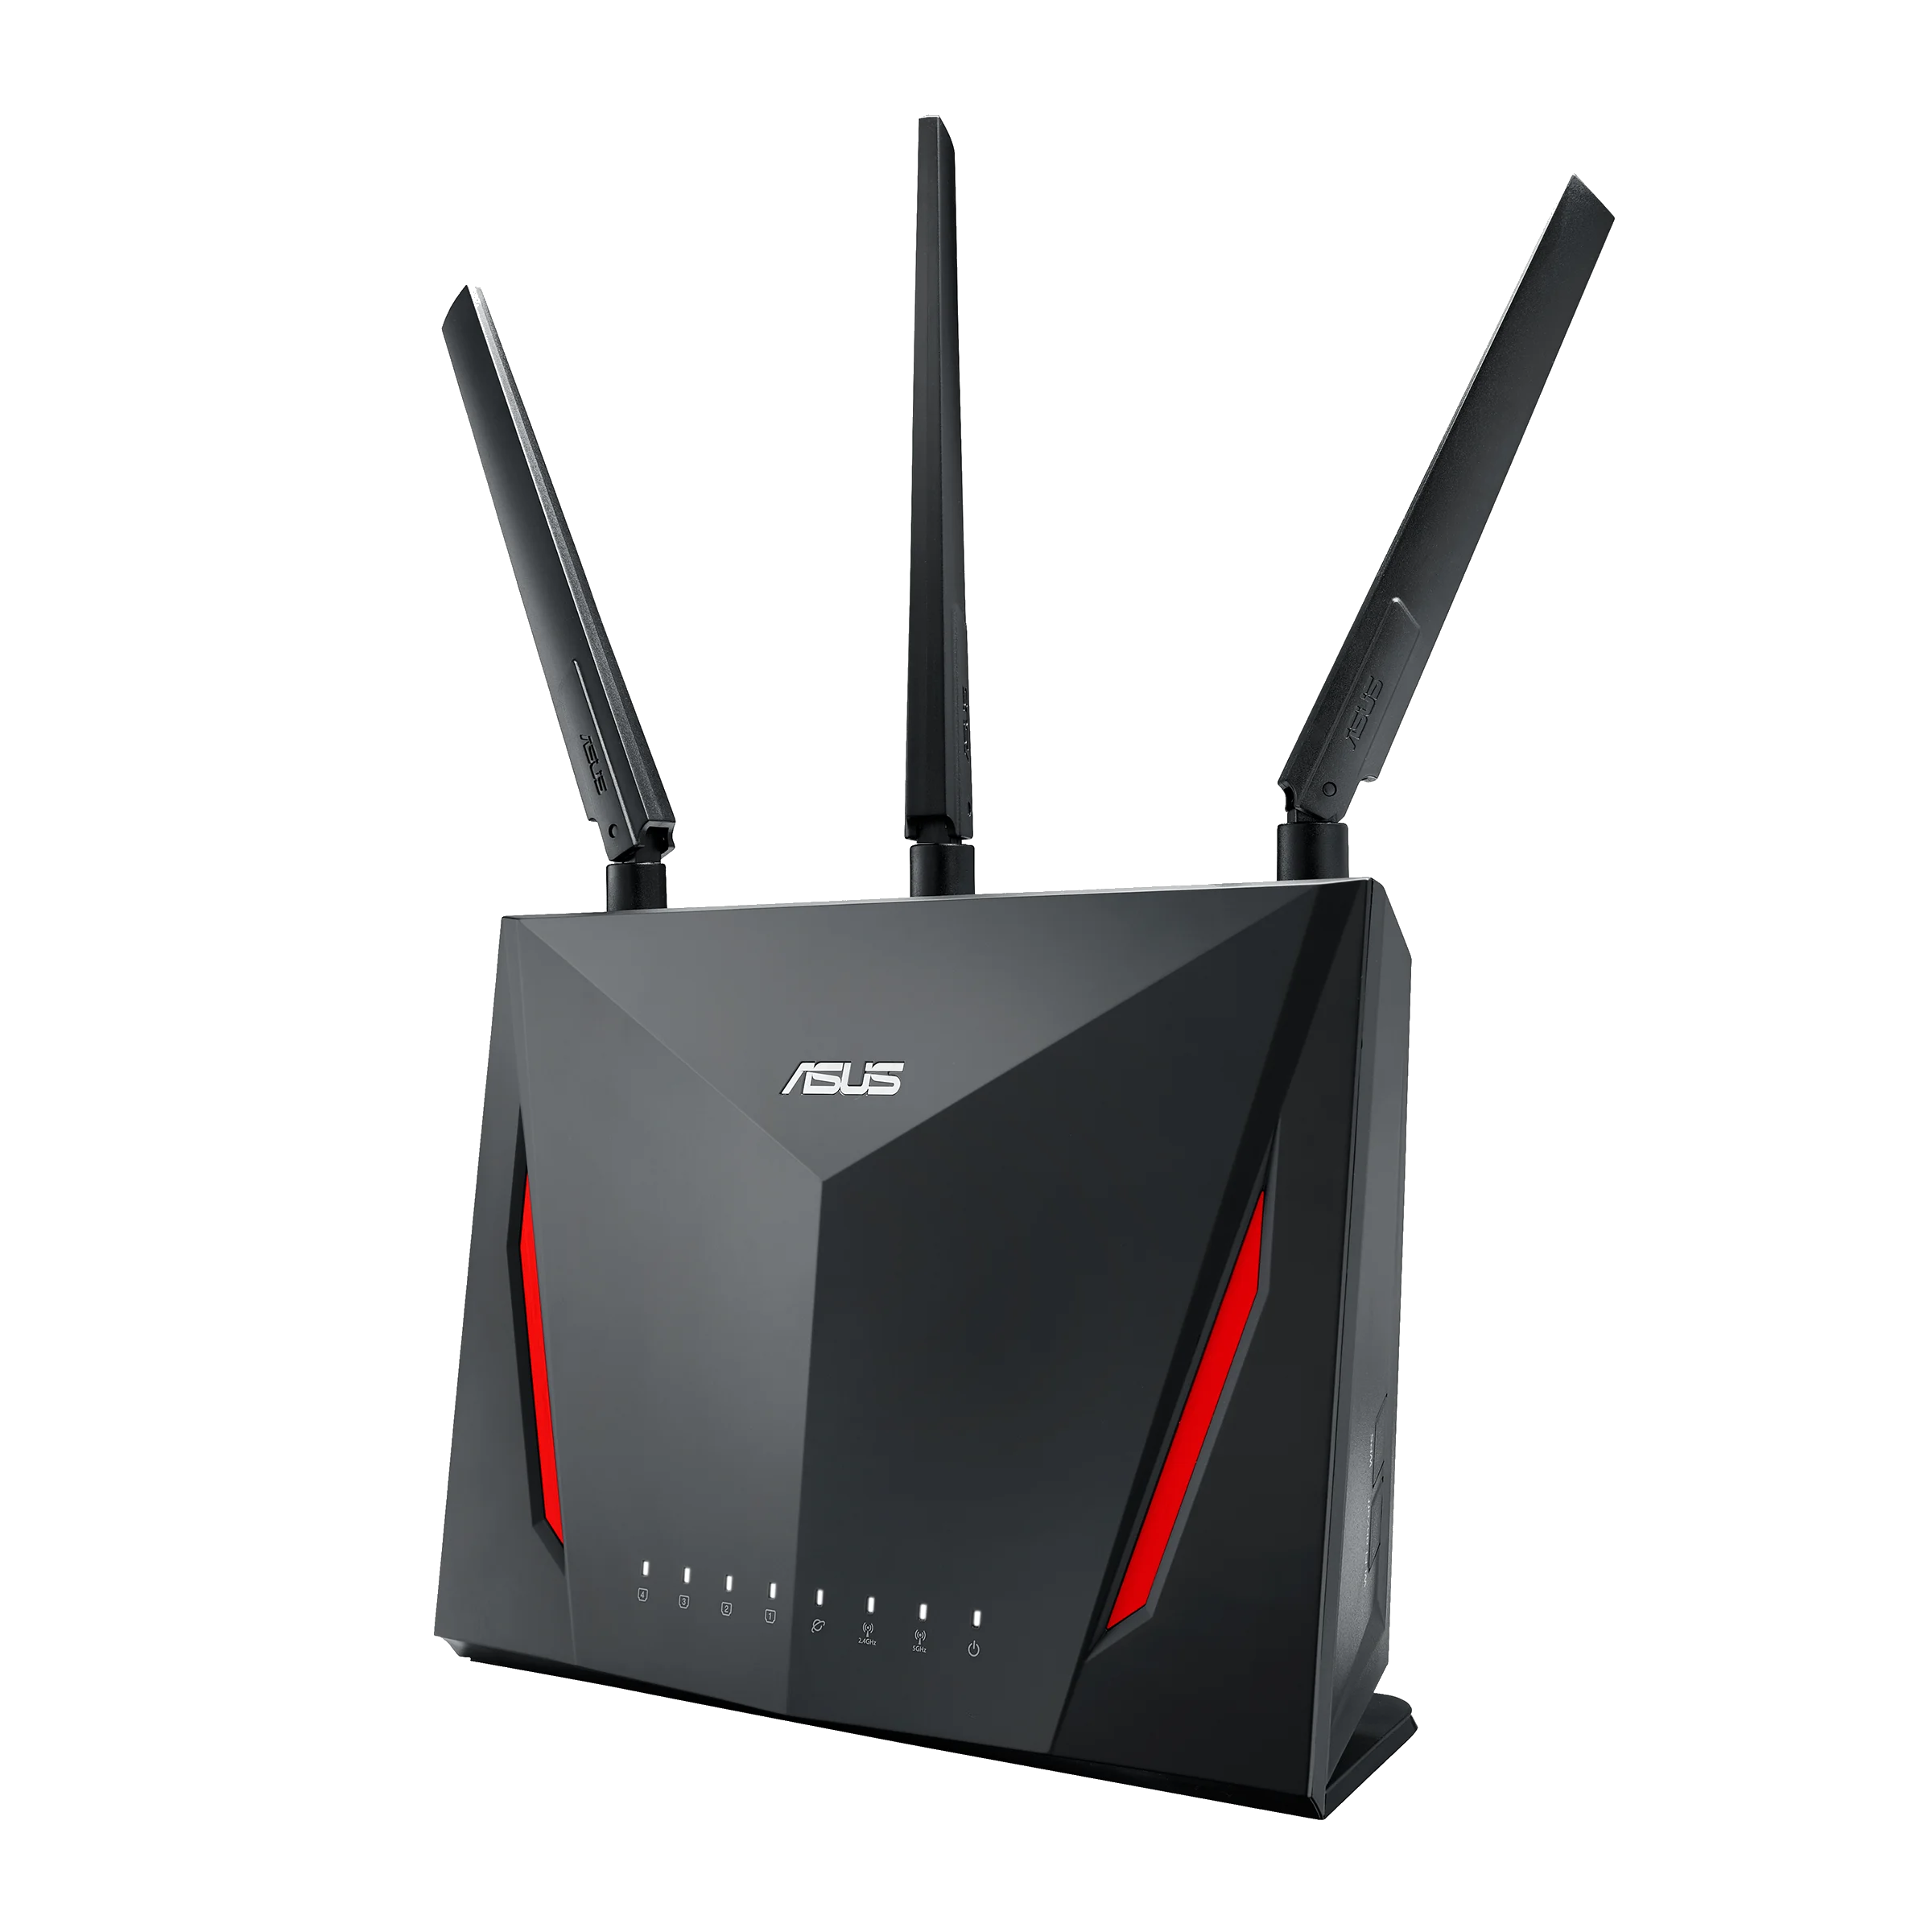 ASUS RT-AC86U AC2900 2900Mbps Dual-Band Wi-Fi Gaming Router with MU-MIMO AiMesh for Mesh System WTFast game accelerator